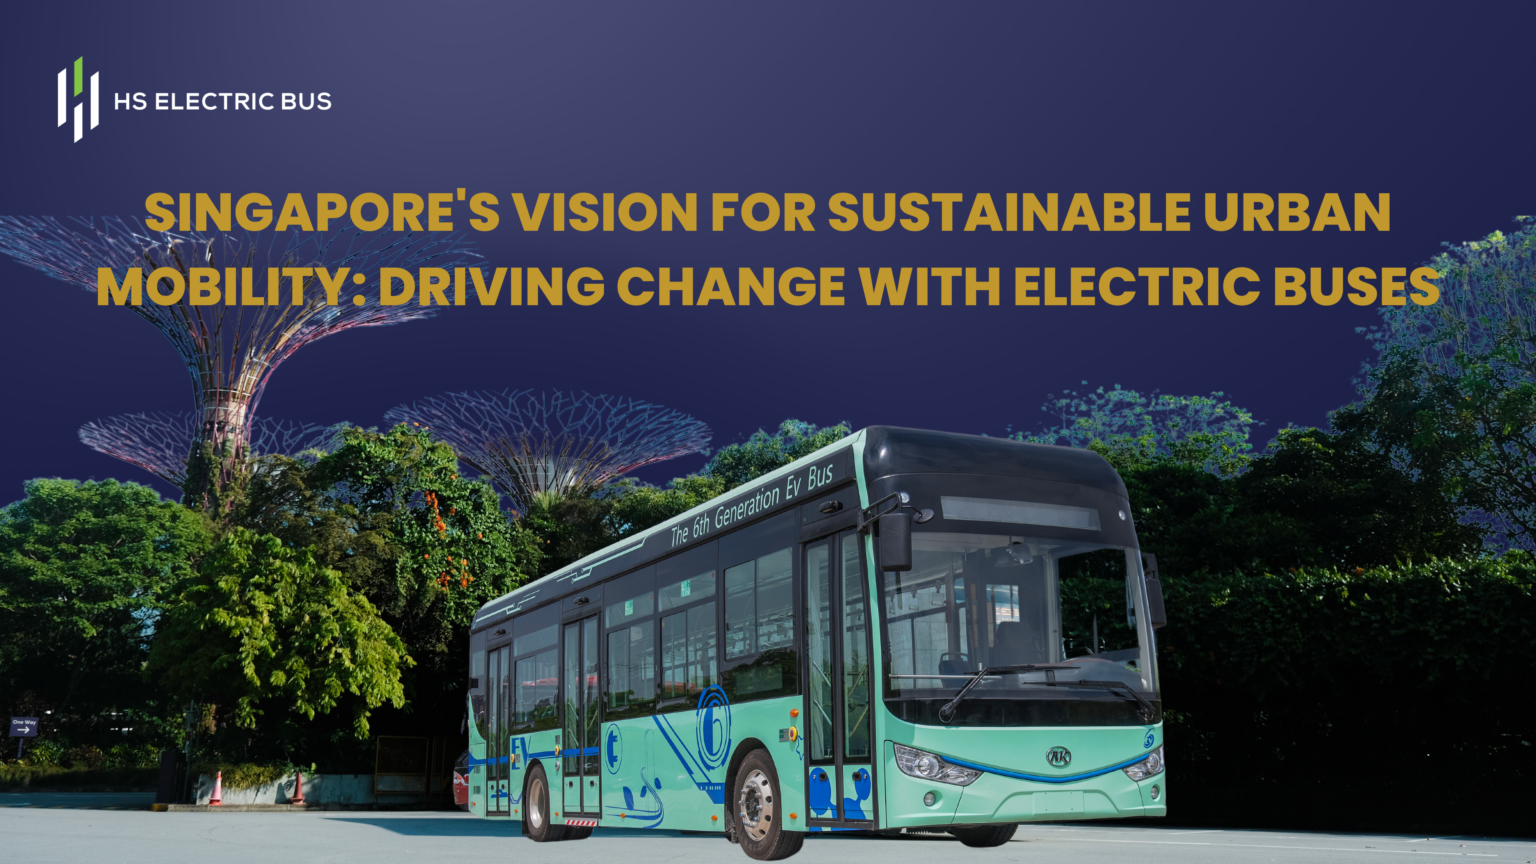 Singapore's Vision for Sustainable Urban Mobility: Driving Change with Electric Buses